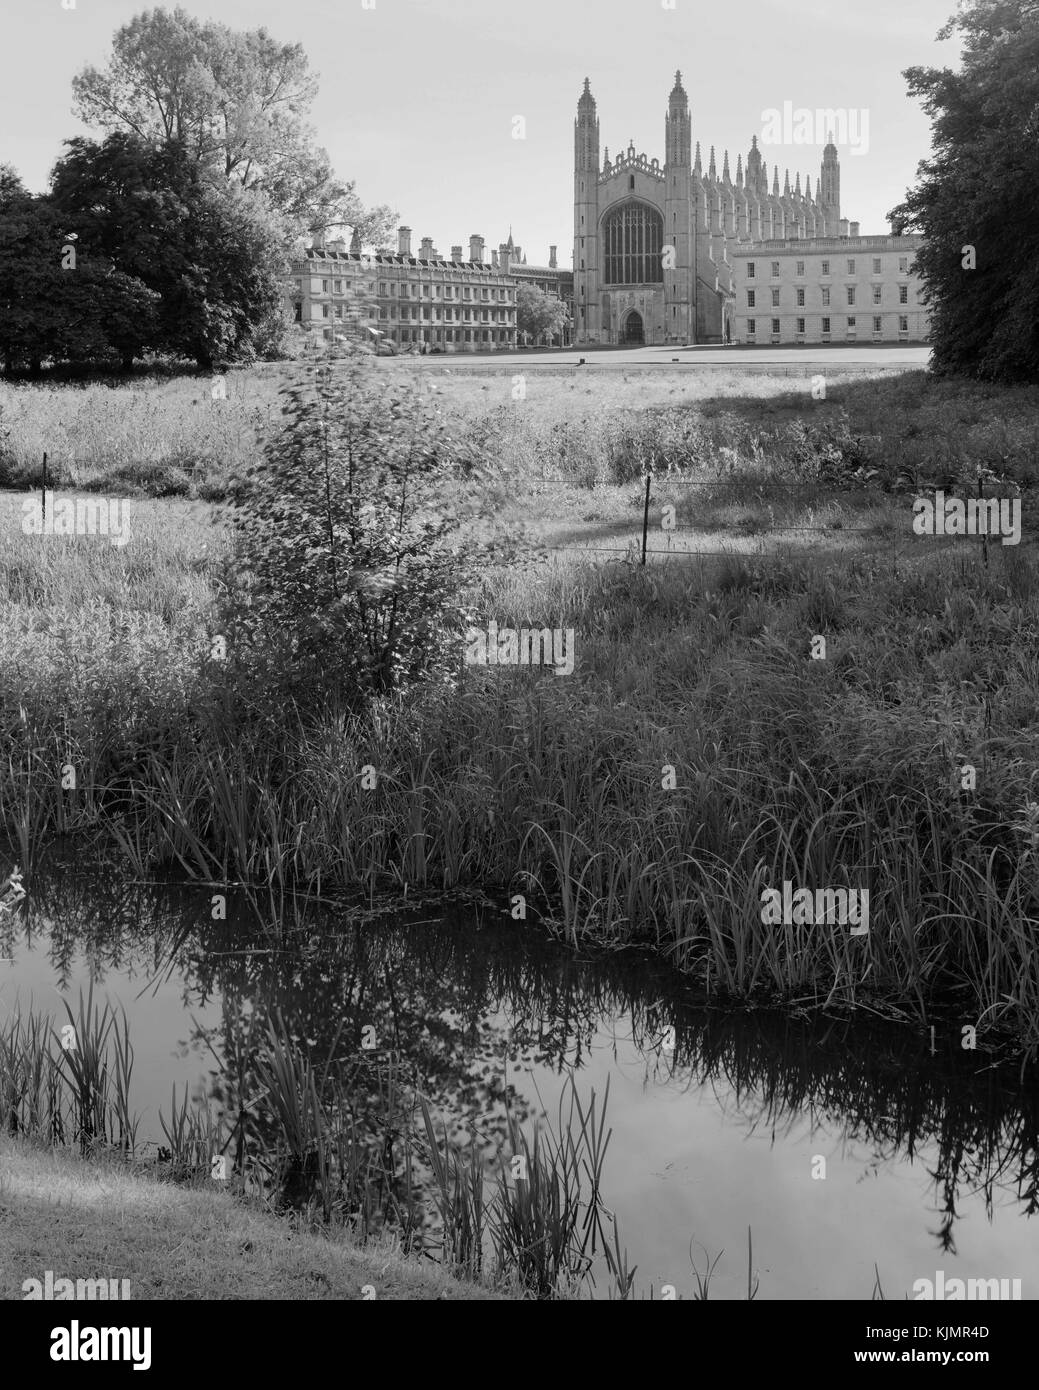 King's College Chapel and Clare College Cambridge from the Backs Stock Photo